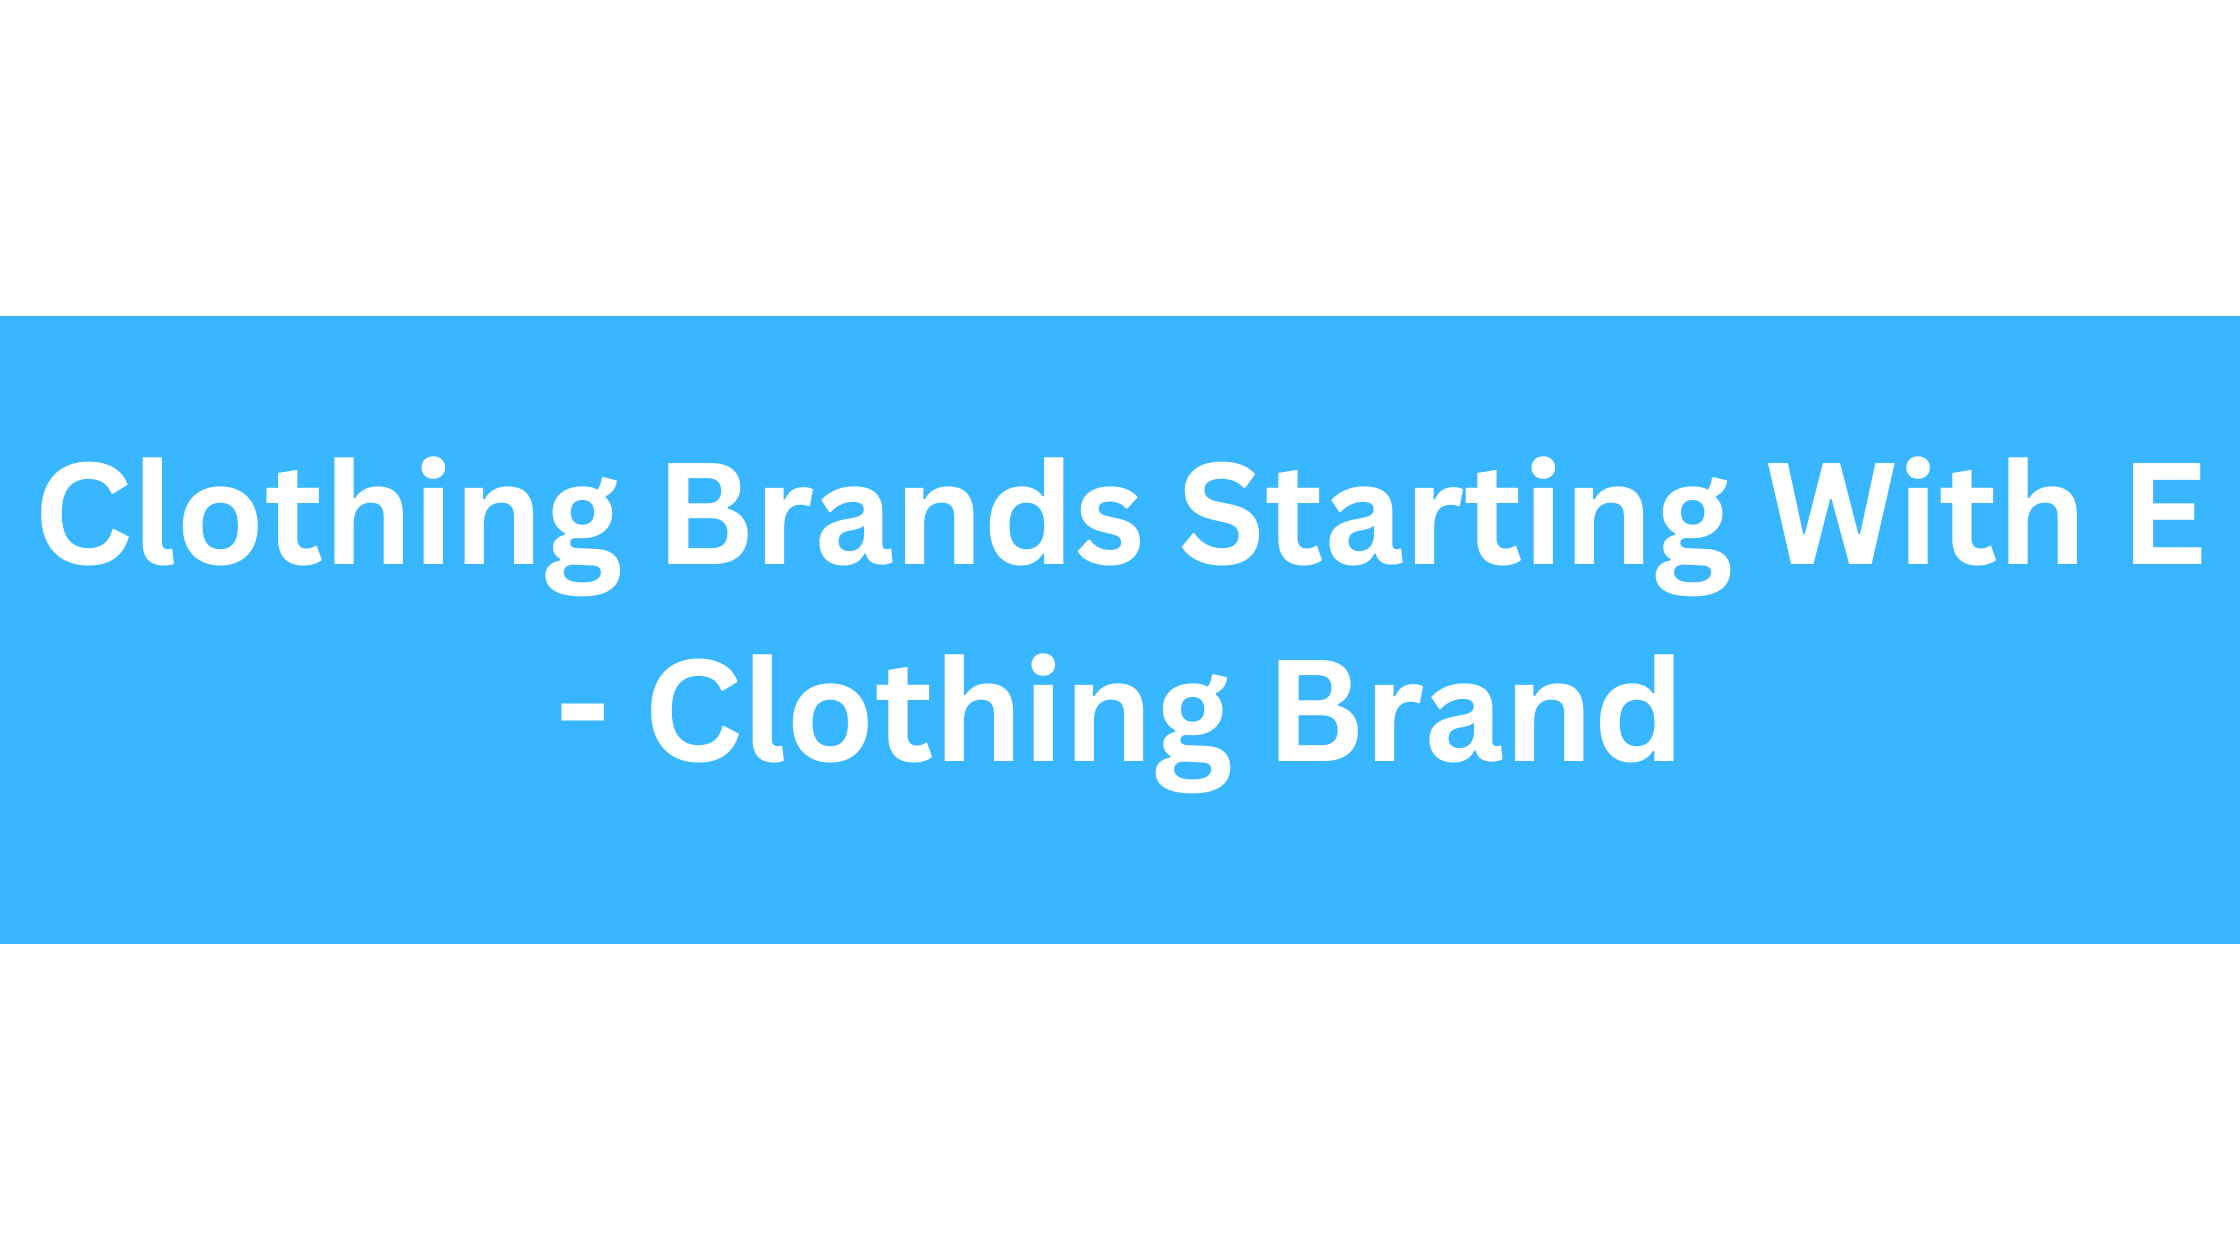 Clothing Brands Starting With E